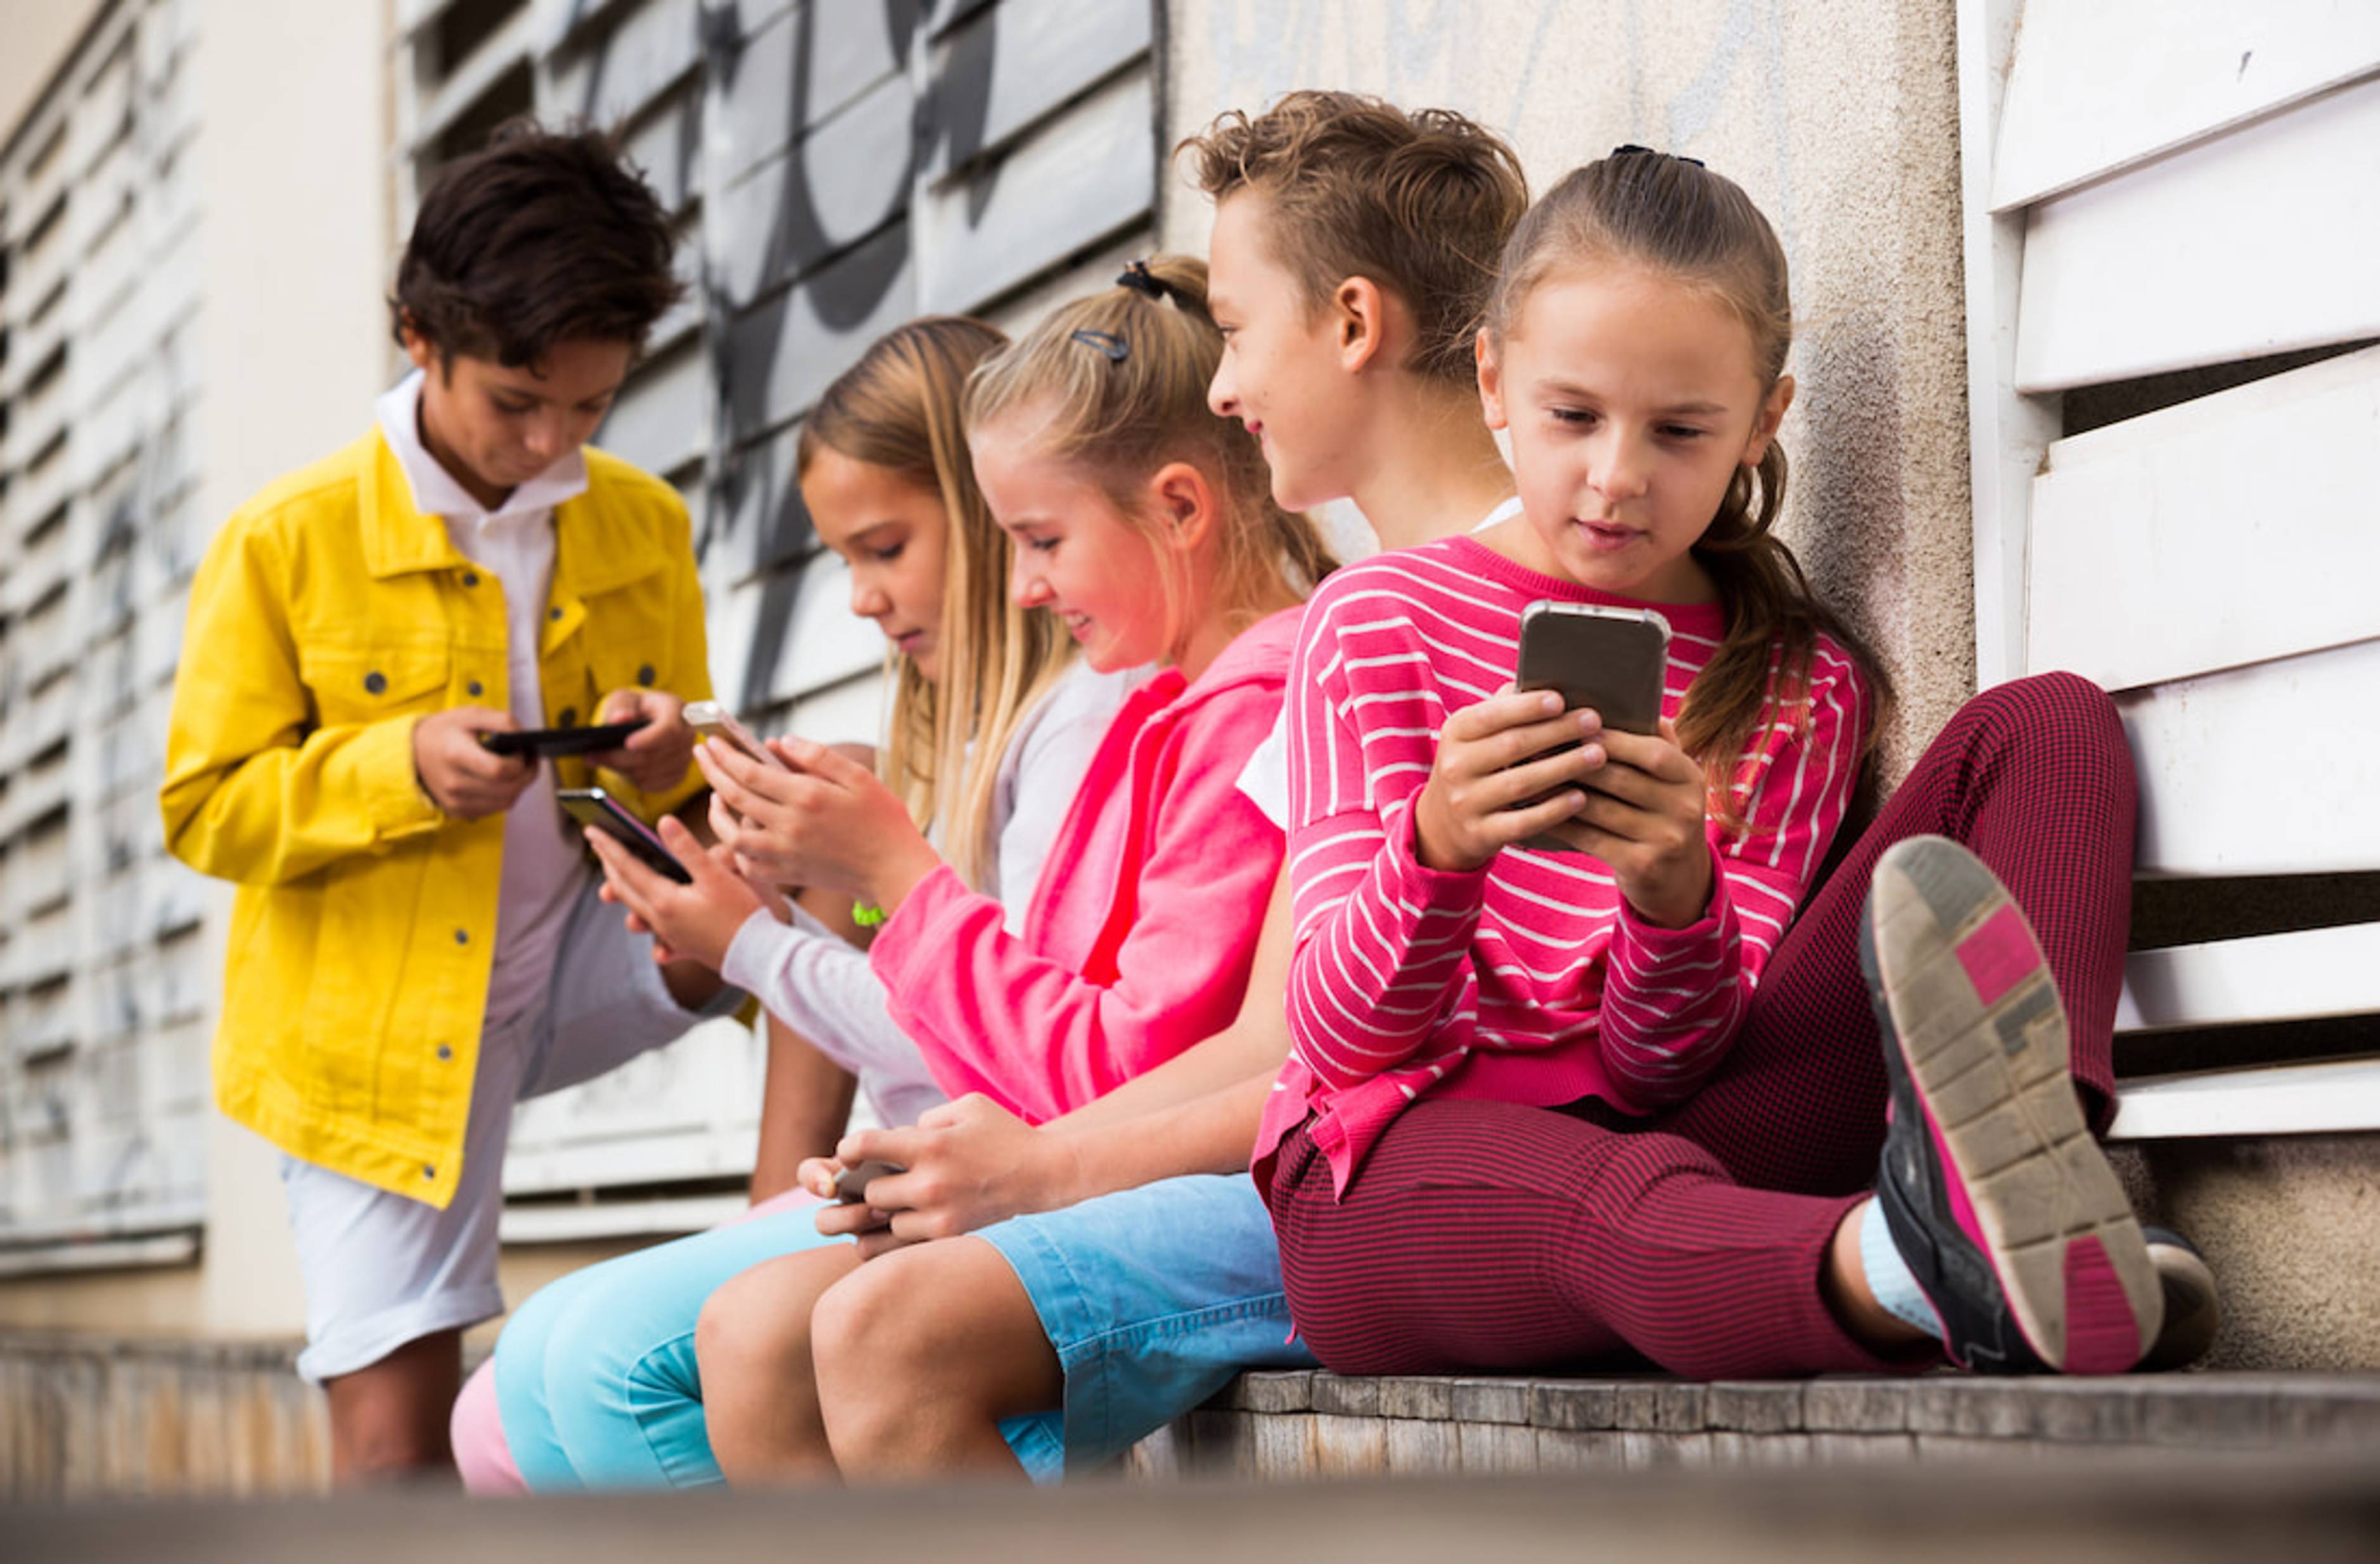 Buying Your Child a Phone: Things for Parents to Consider